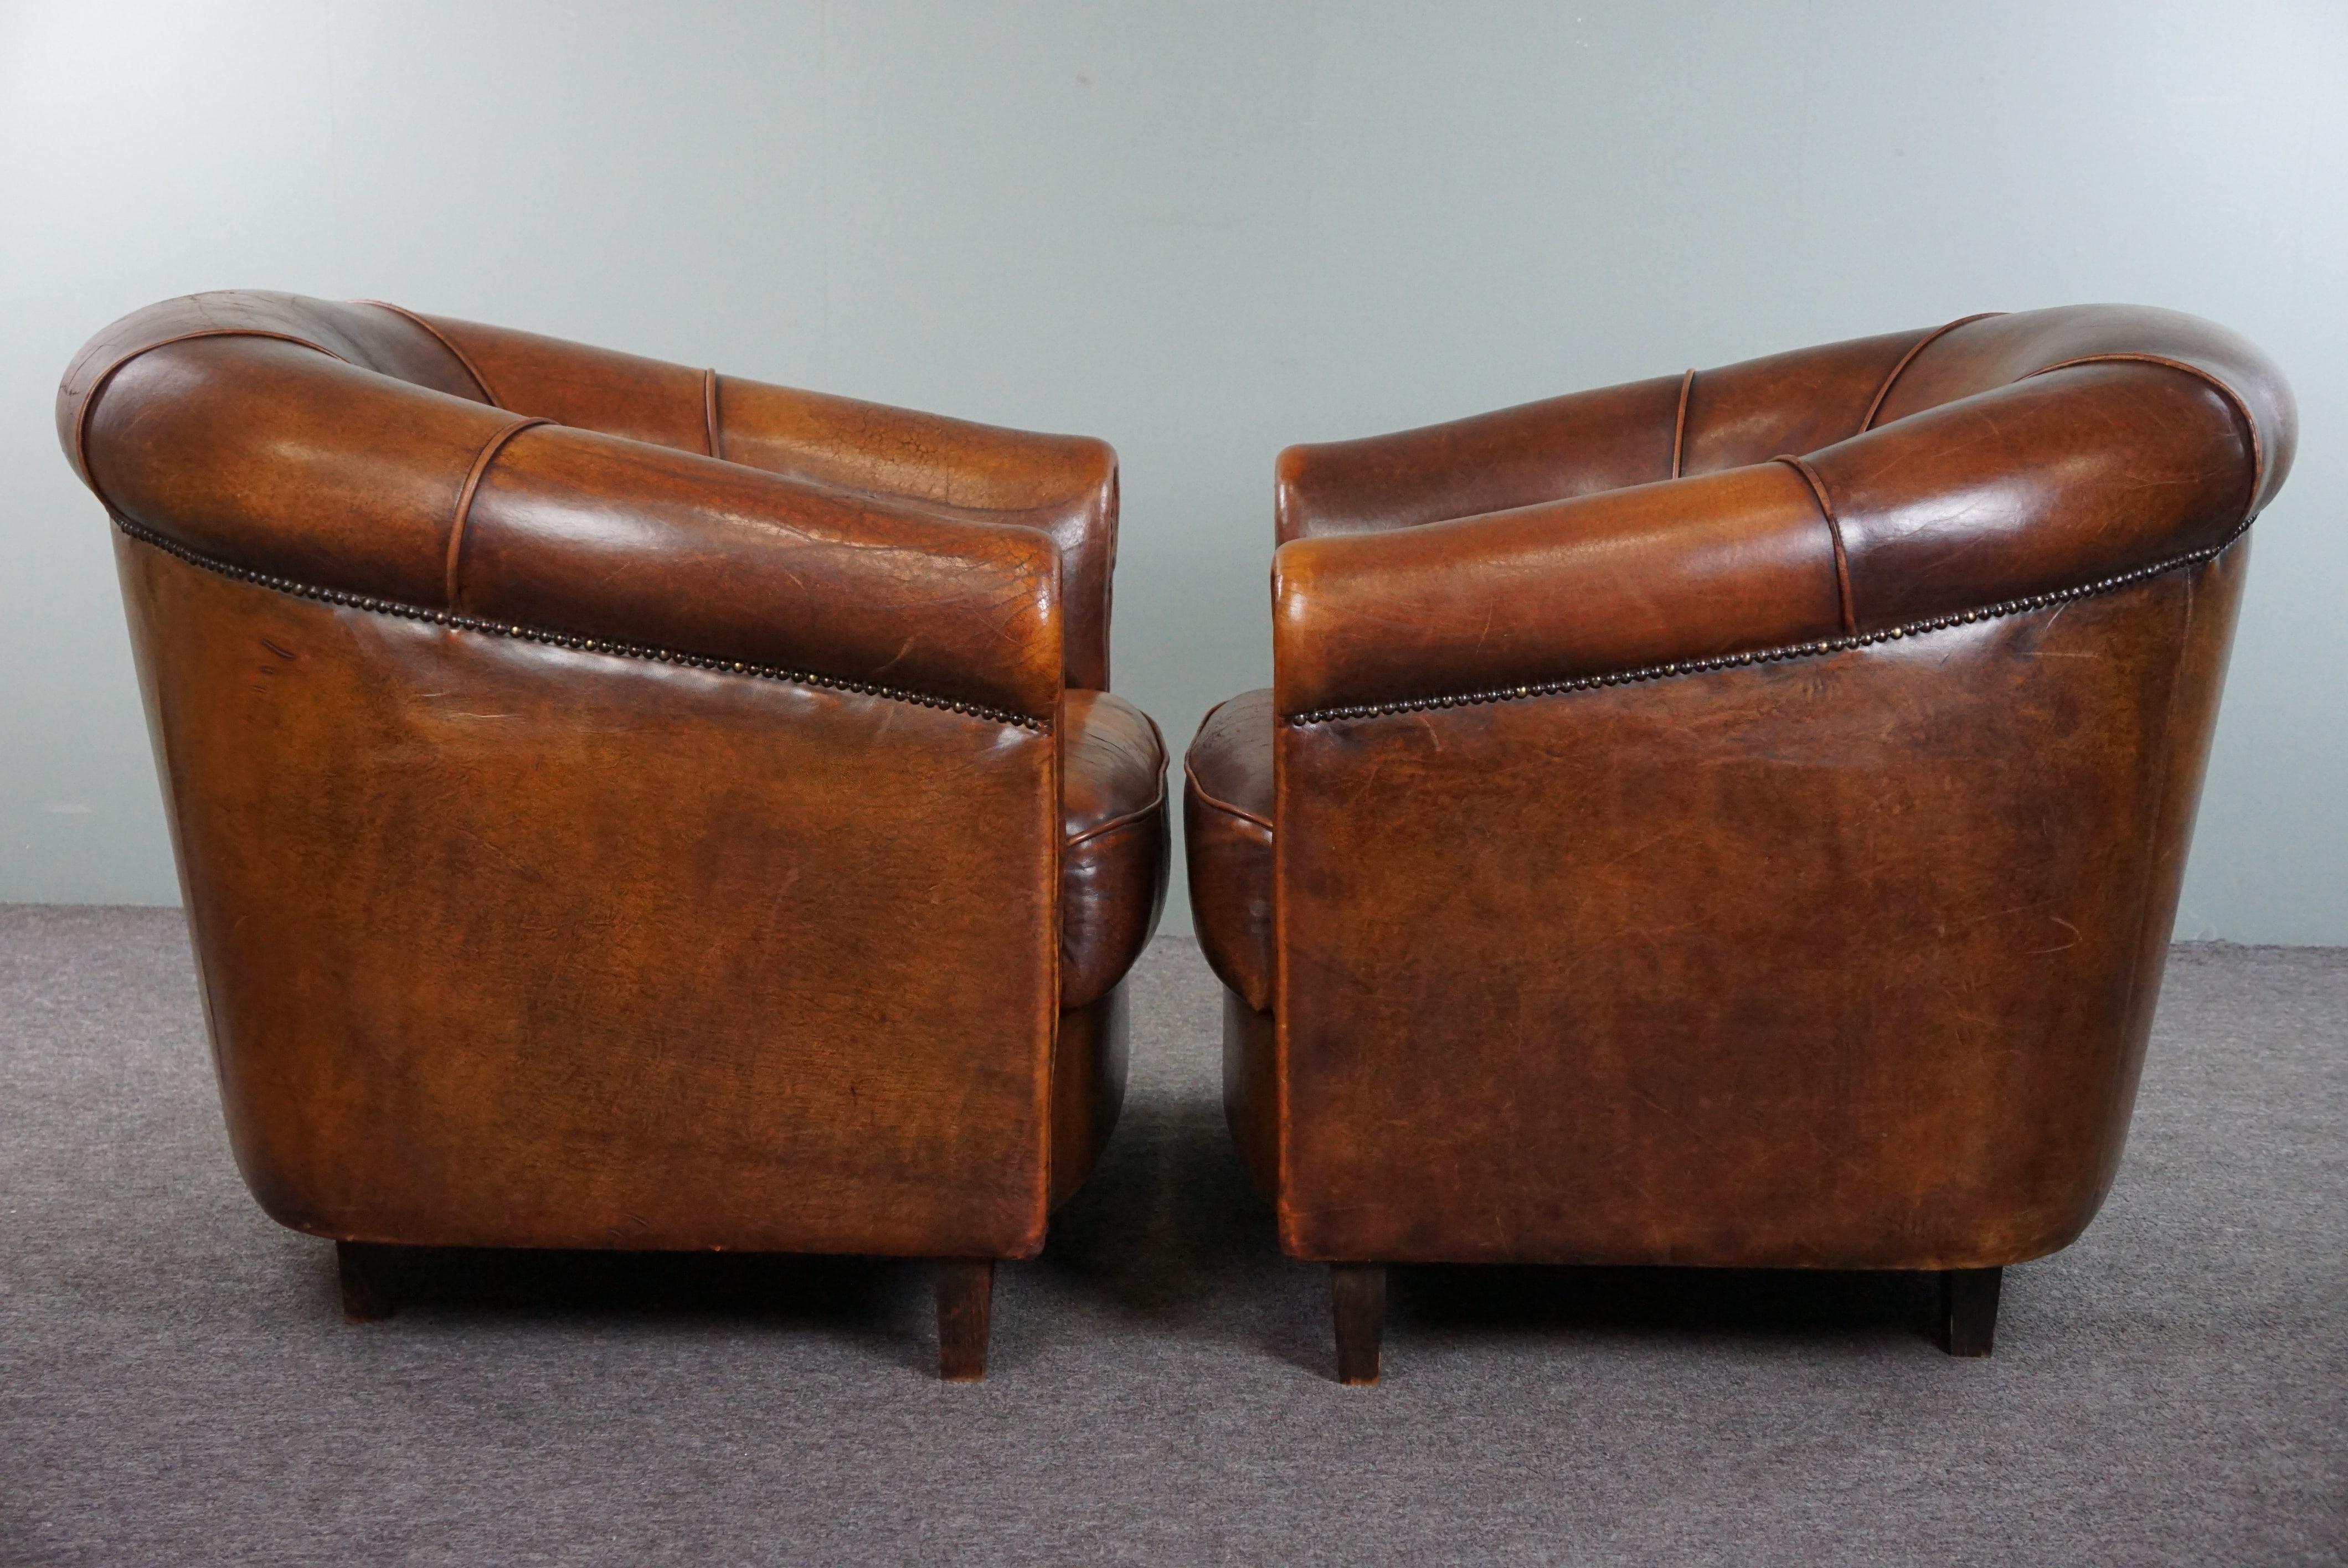 Offered is this lovely and luxurious set of two club armchairs made of sheep leather in a beautiful warm dark color. Nothing is more beautiful than a set of two matching sheep leather club armchairs in your room or office to complete the look. This